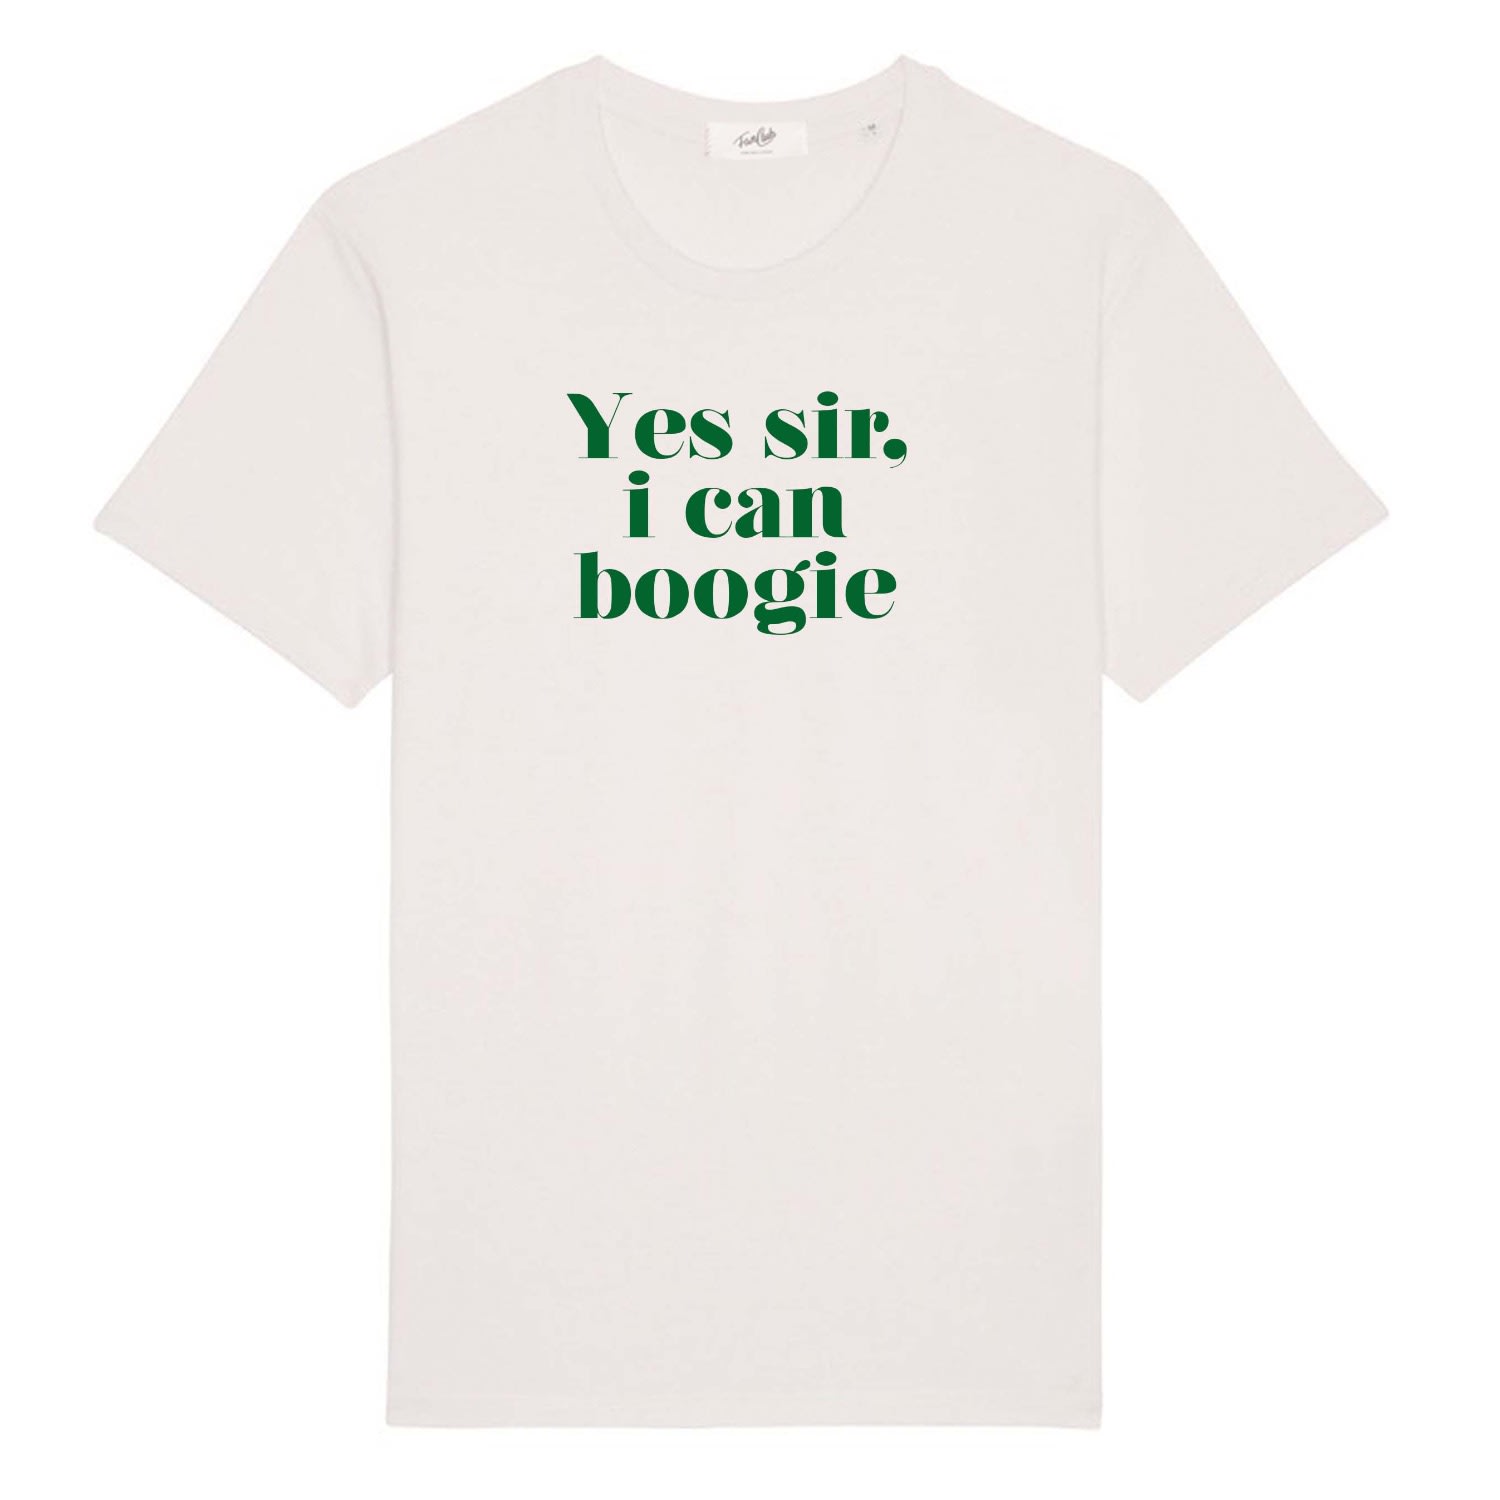 Women’s Neutrals Yes Sir I Can Boogie Oversized Retro Slogan T-Shirt - Vintage White Small Fanclub